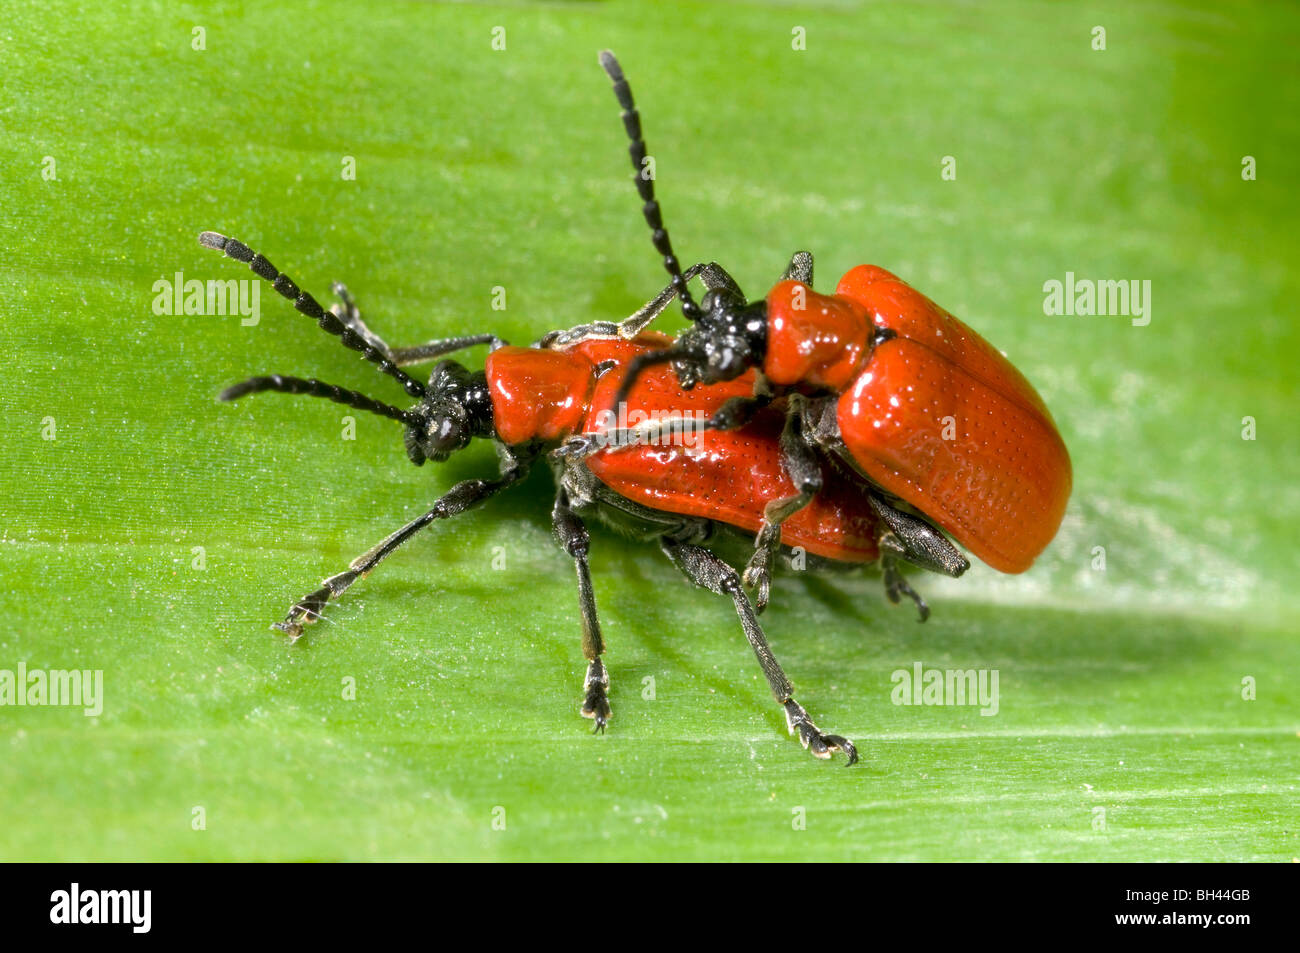 Beetles (Lilocerus lilii) mating on lily leaf in garden. Stock Photo